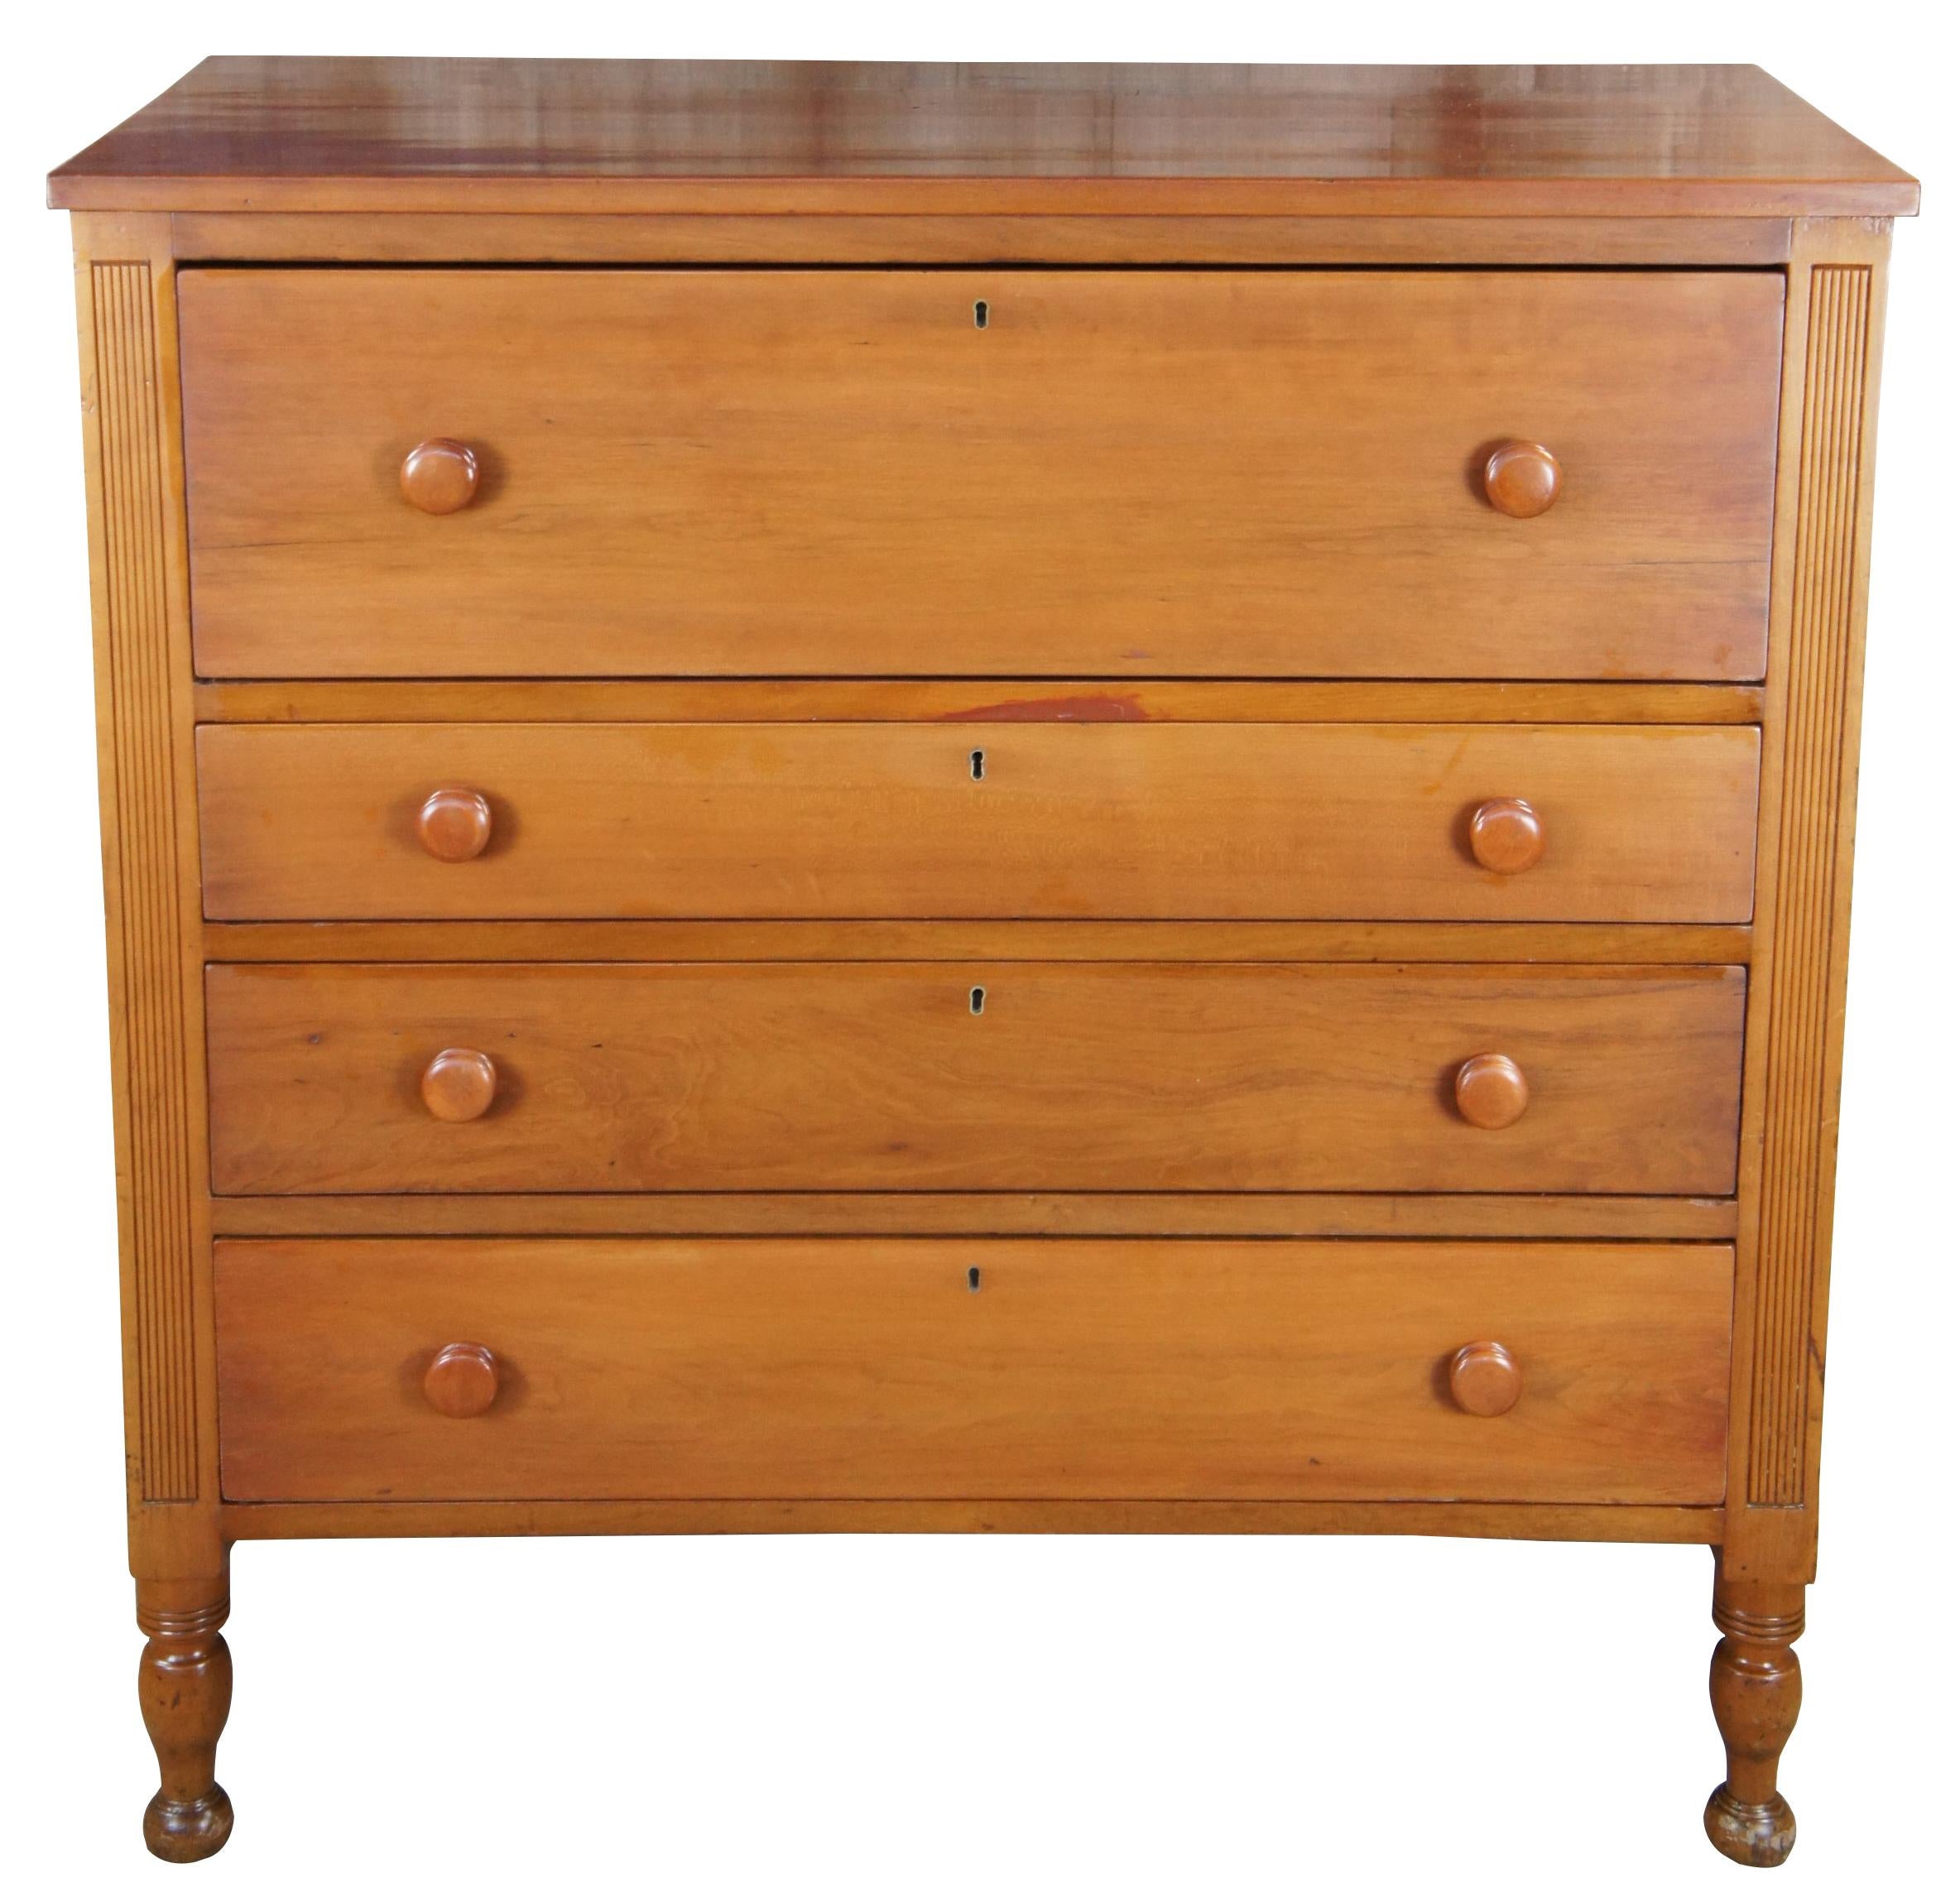 Impressive American tallboy dresser, circa 1840s (late Federal Era). A rectangular form made from solid cherry with four hand dovetailed drawers, fluted stiles and turned ribbed turnip feet. Includes lockable drawers and smooth lathed drawer pulls.